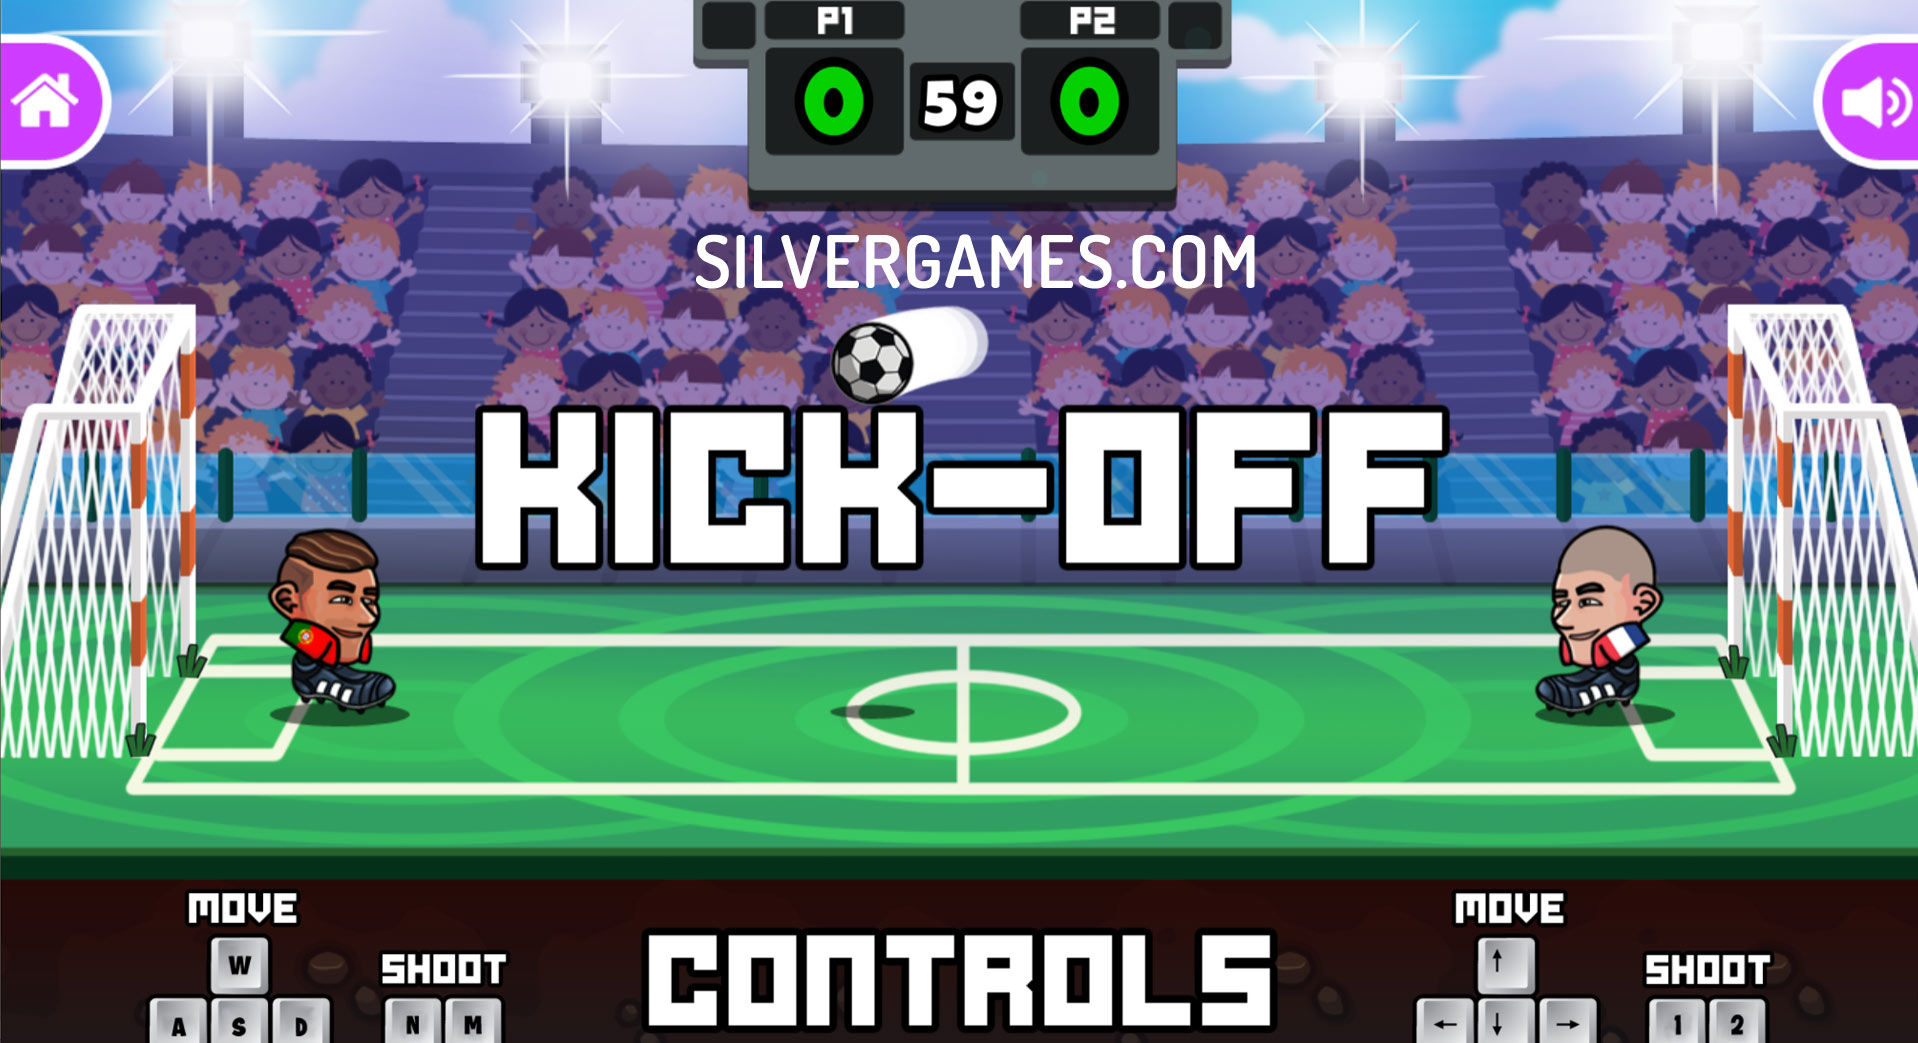 Head To Head Best Soccer Game by Xaavia Studios